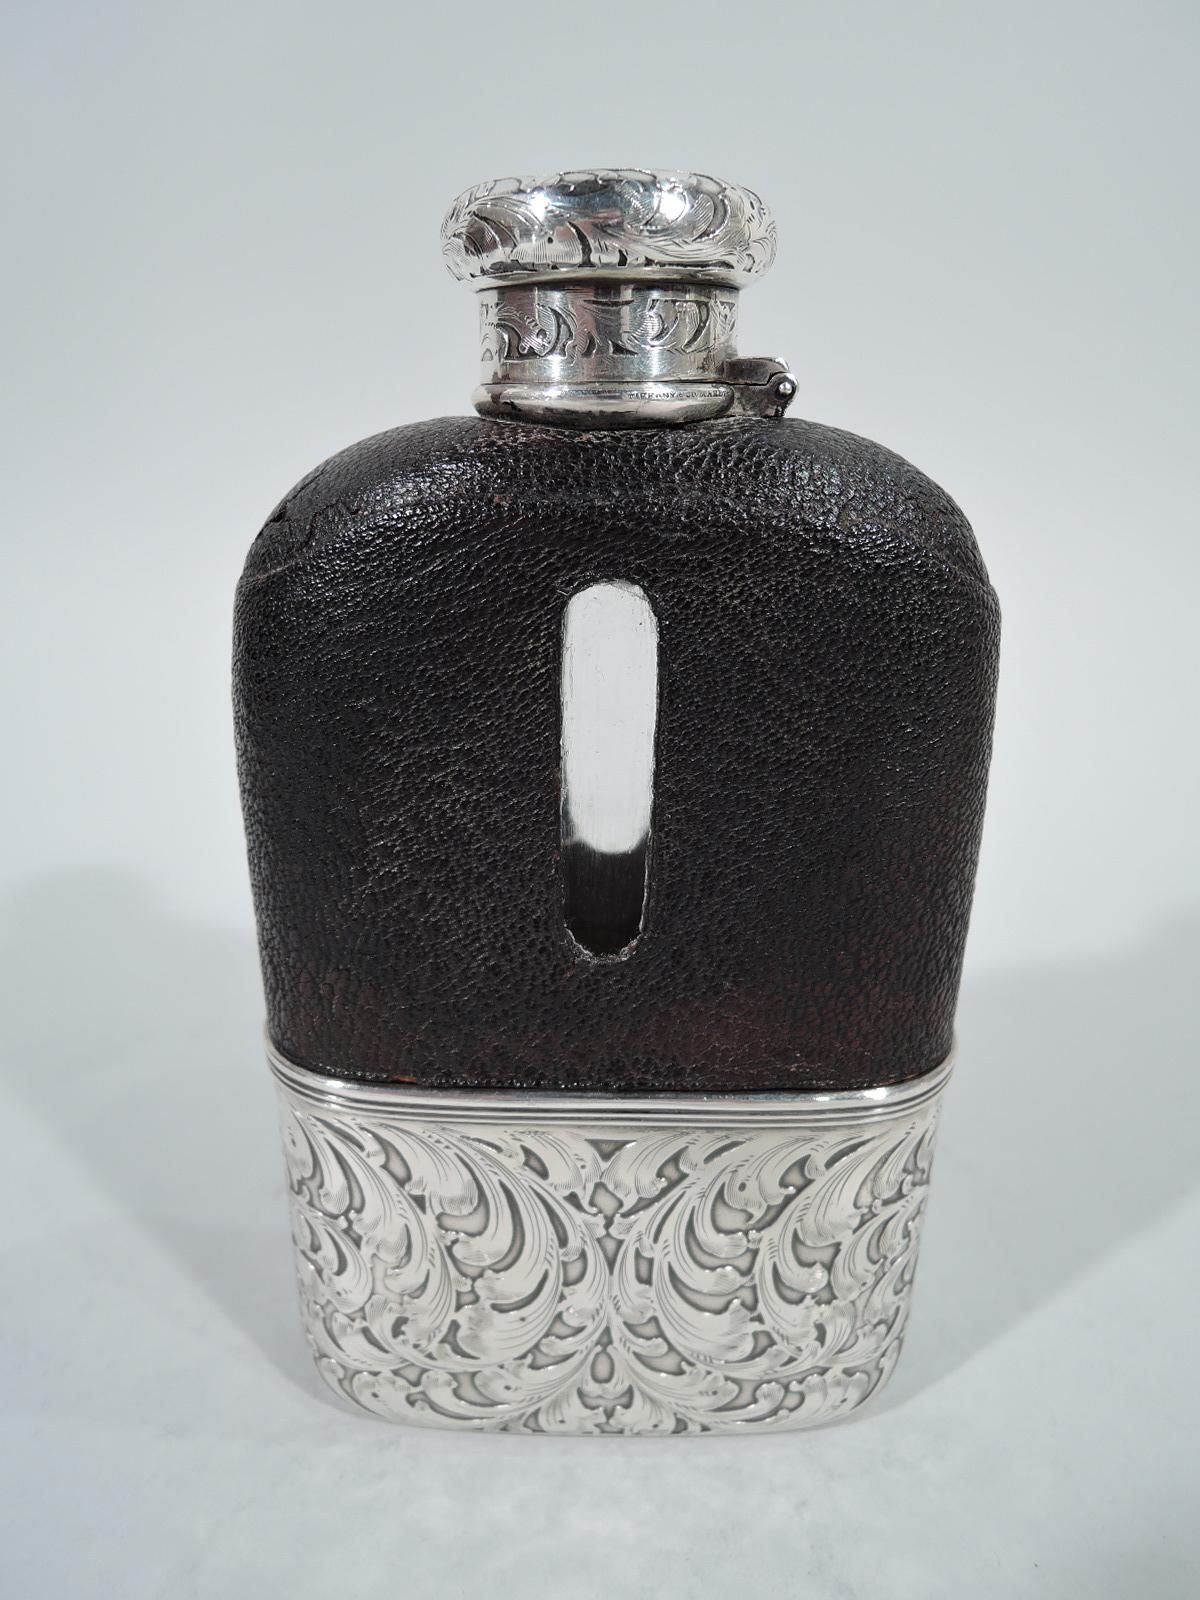 Edwardian safari flask. Made by Tiffany & Co. in New York. Rectilinear vessel in clear glass. Top half encased in leather with cut-out tubular windows. Bottom half encased in detachable sterling silver cup with acid-etched armorial lions and